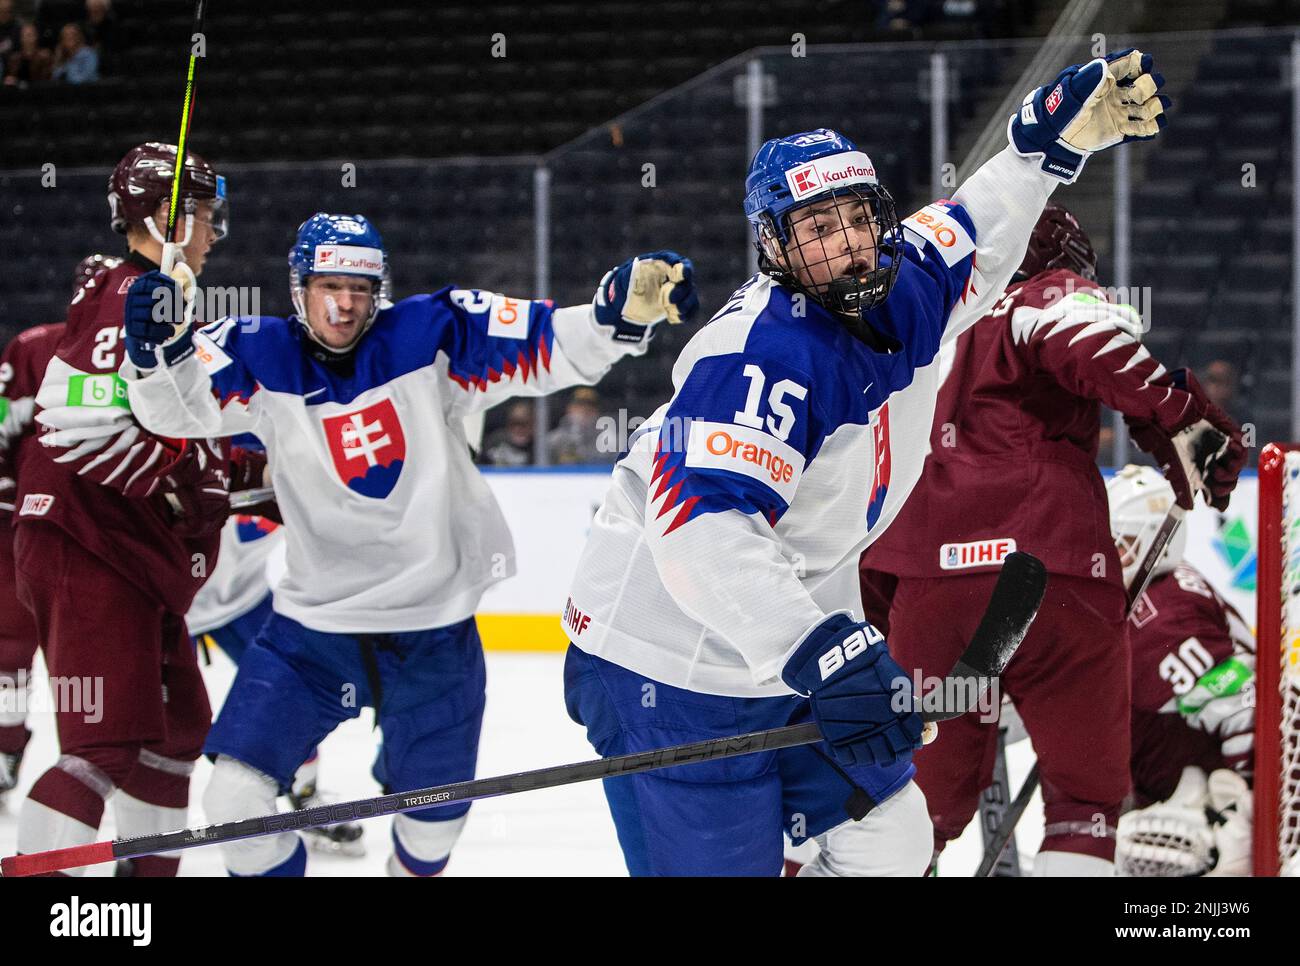 Slovakias Dalibor Dvorsky (15) celebrates a goal against Latvia during the second period of an IIHF junior world hockey championships game Friday, Aug